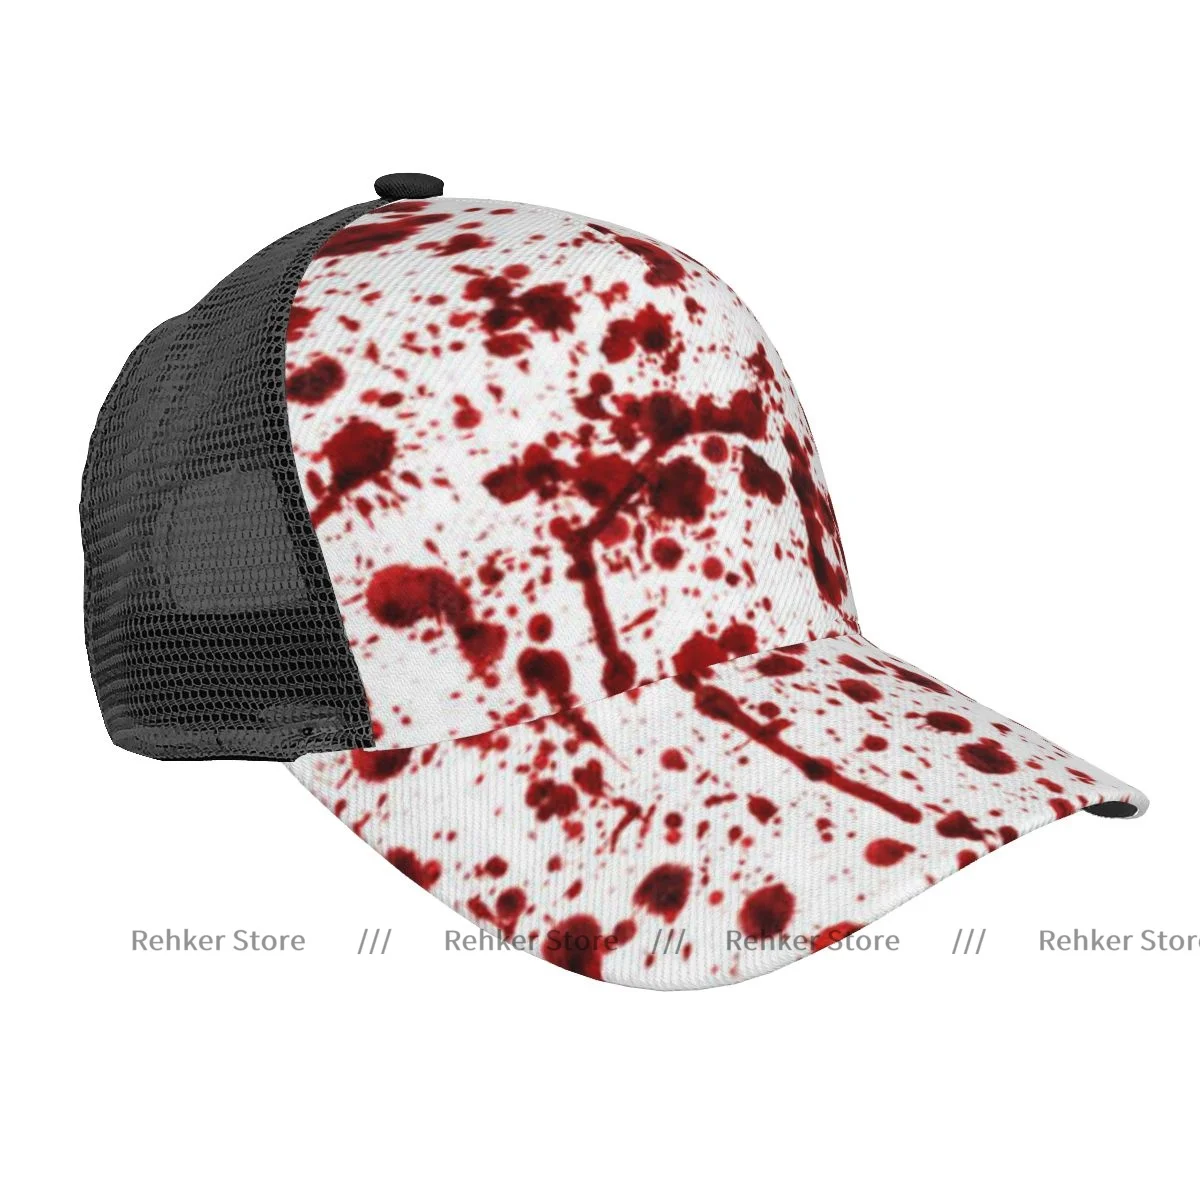 

Summer Unisex Male Breathable Mesh Snapback Hat Splashes Of Blood Grunge Bloodstain Horror Scary Zombie Print Casual Sport Hat